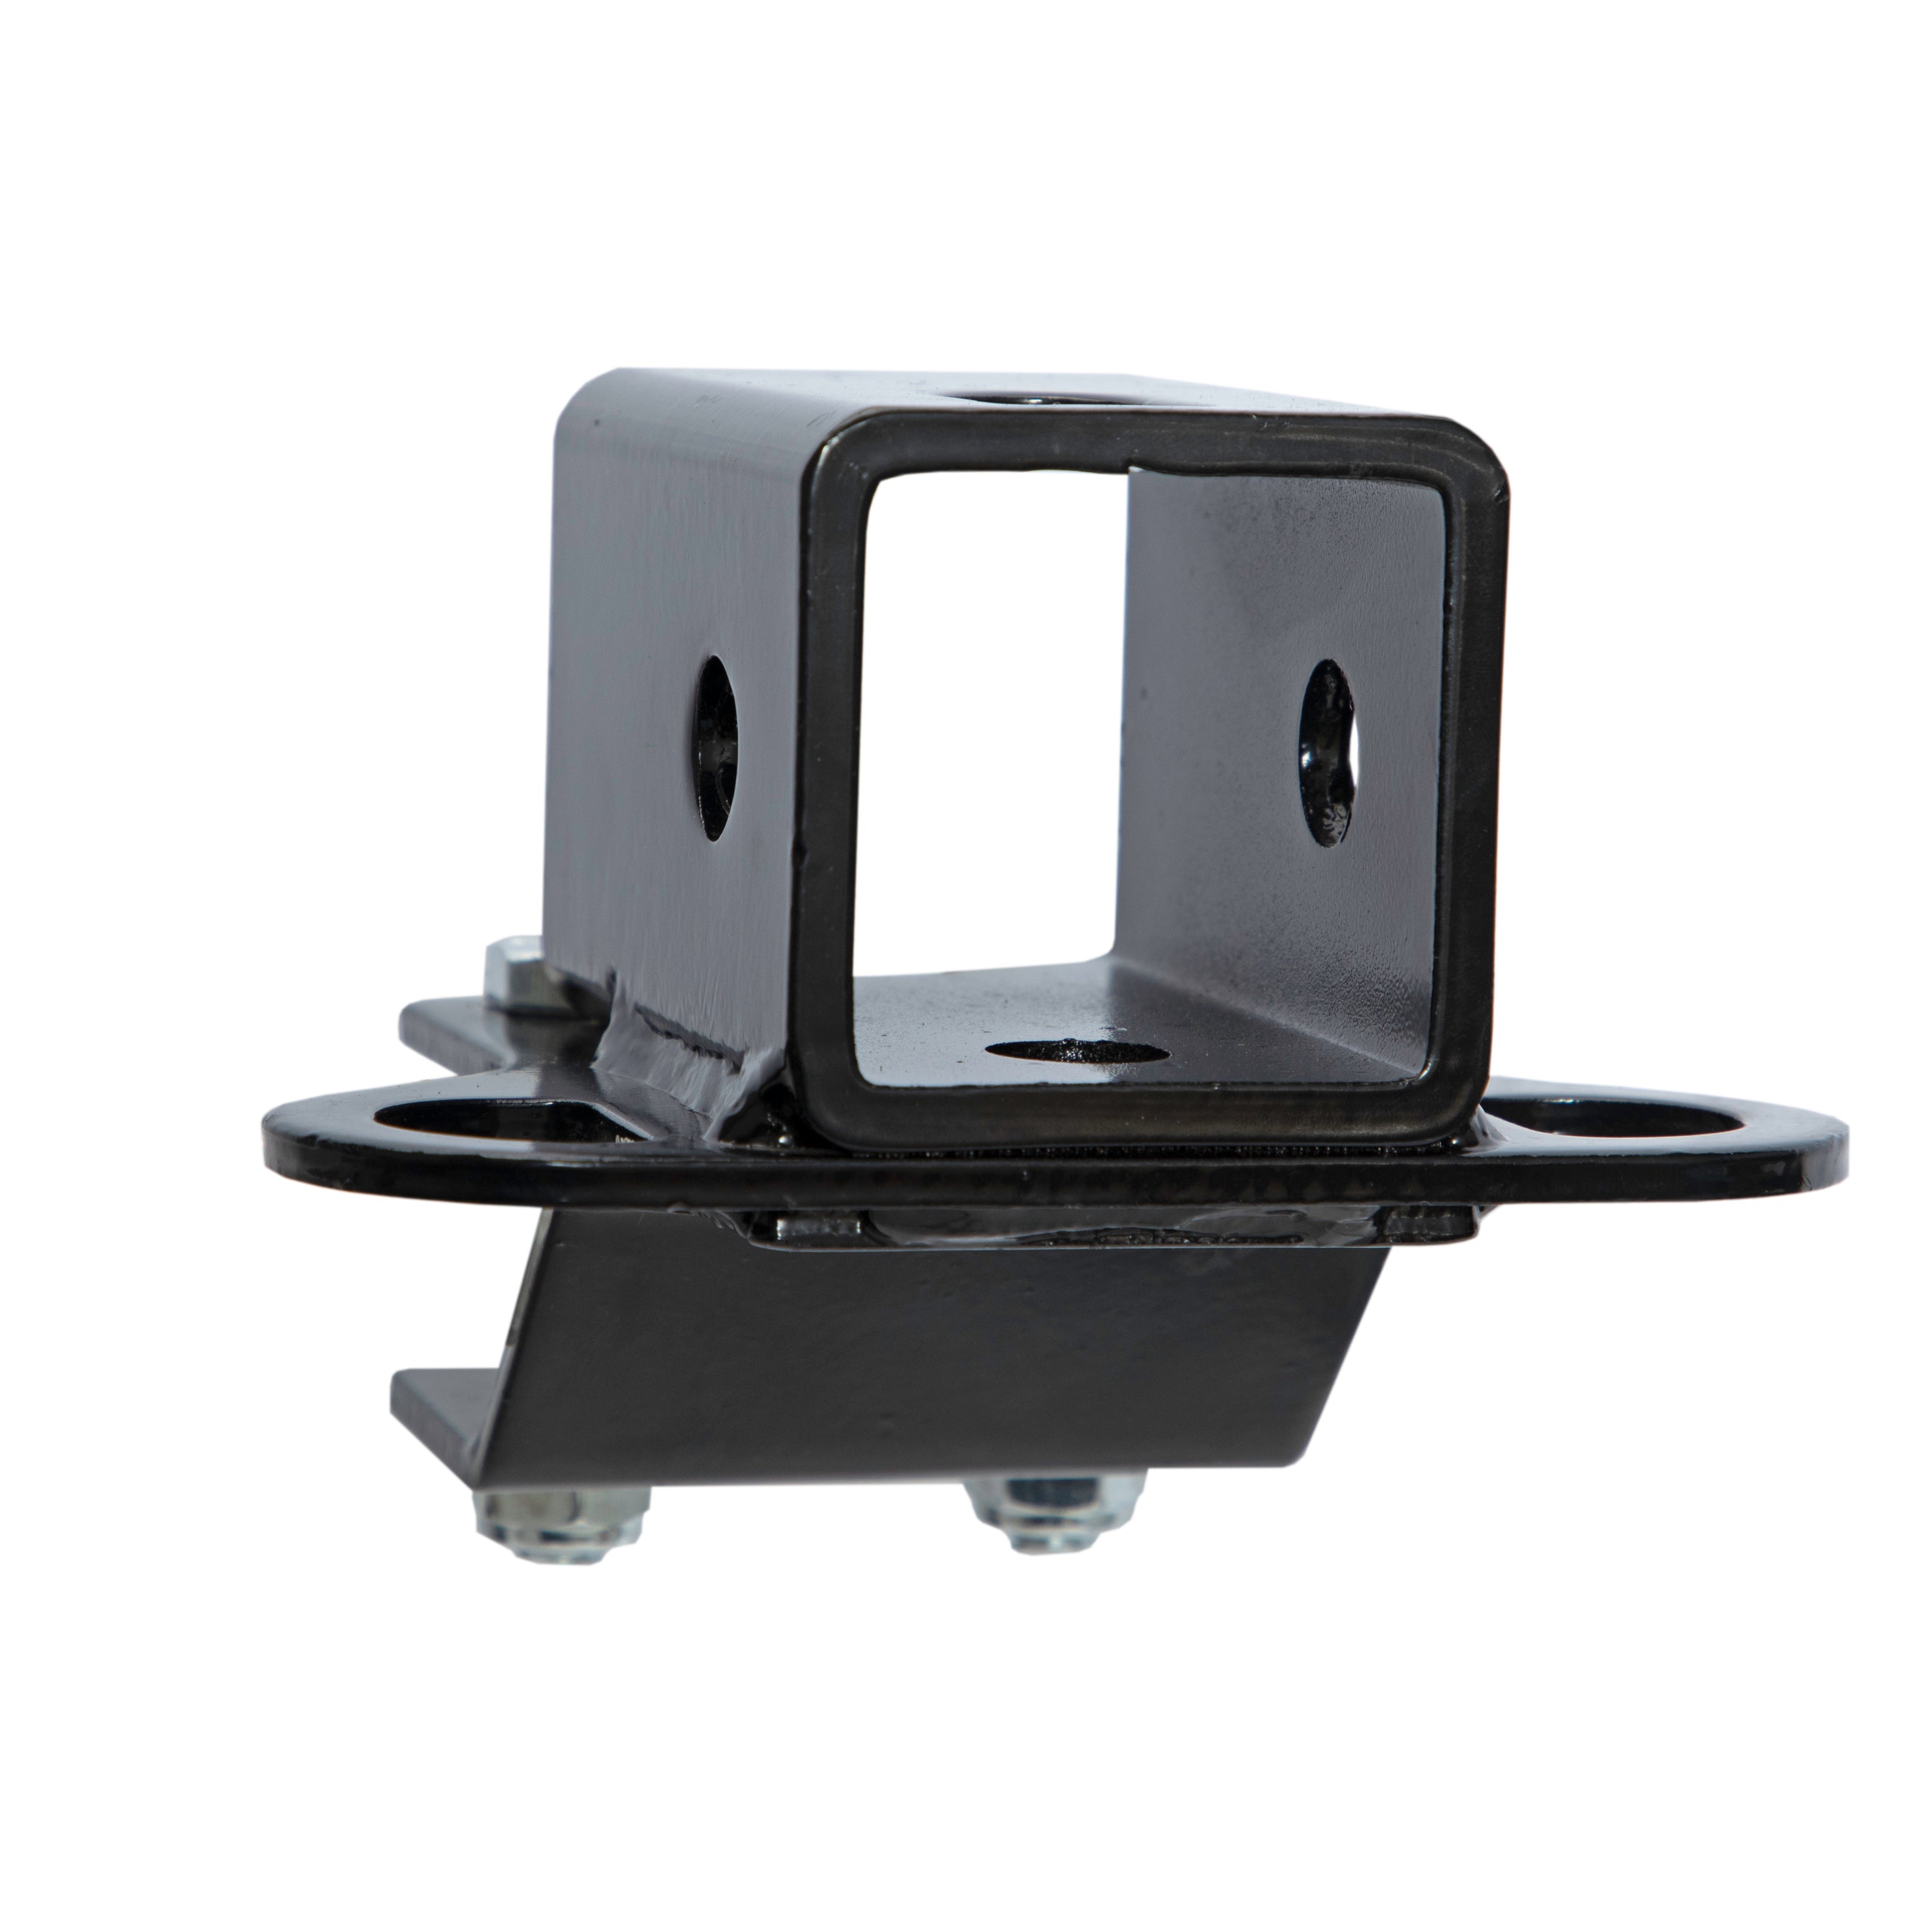 Extreme Max 5600.3301 2" Rear Receiver Hitch for Select Honda Rincon, Rancher, Rubicon, and Foreman ATVs